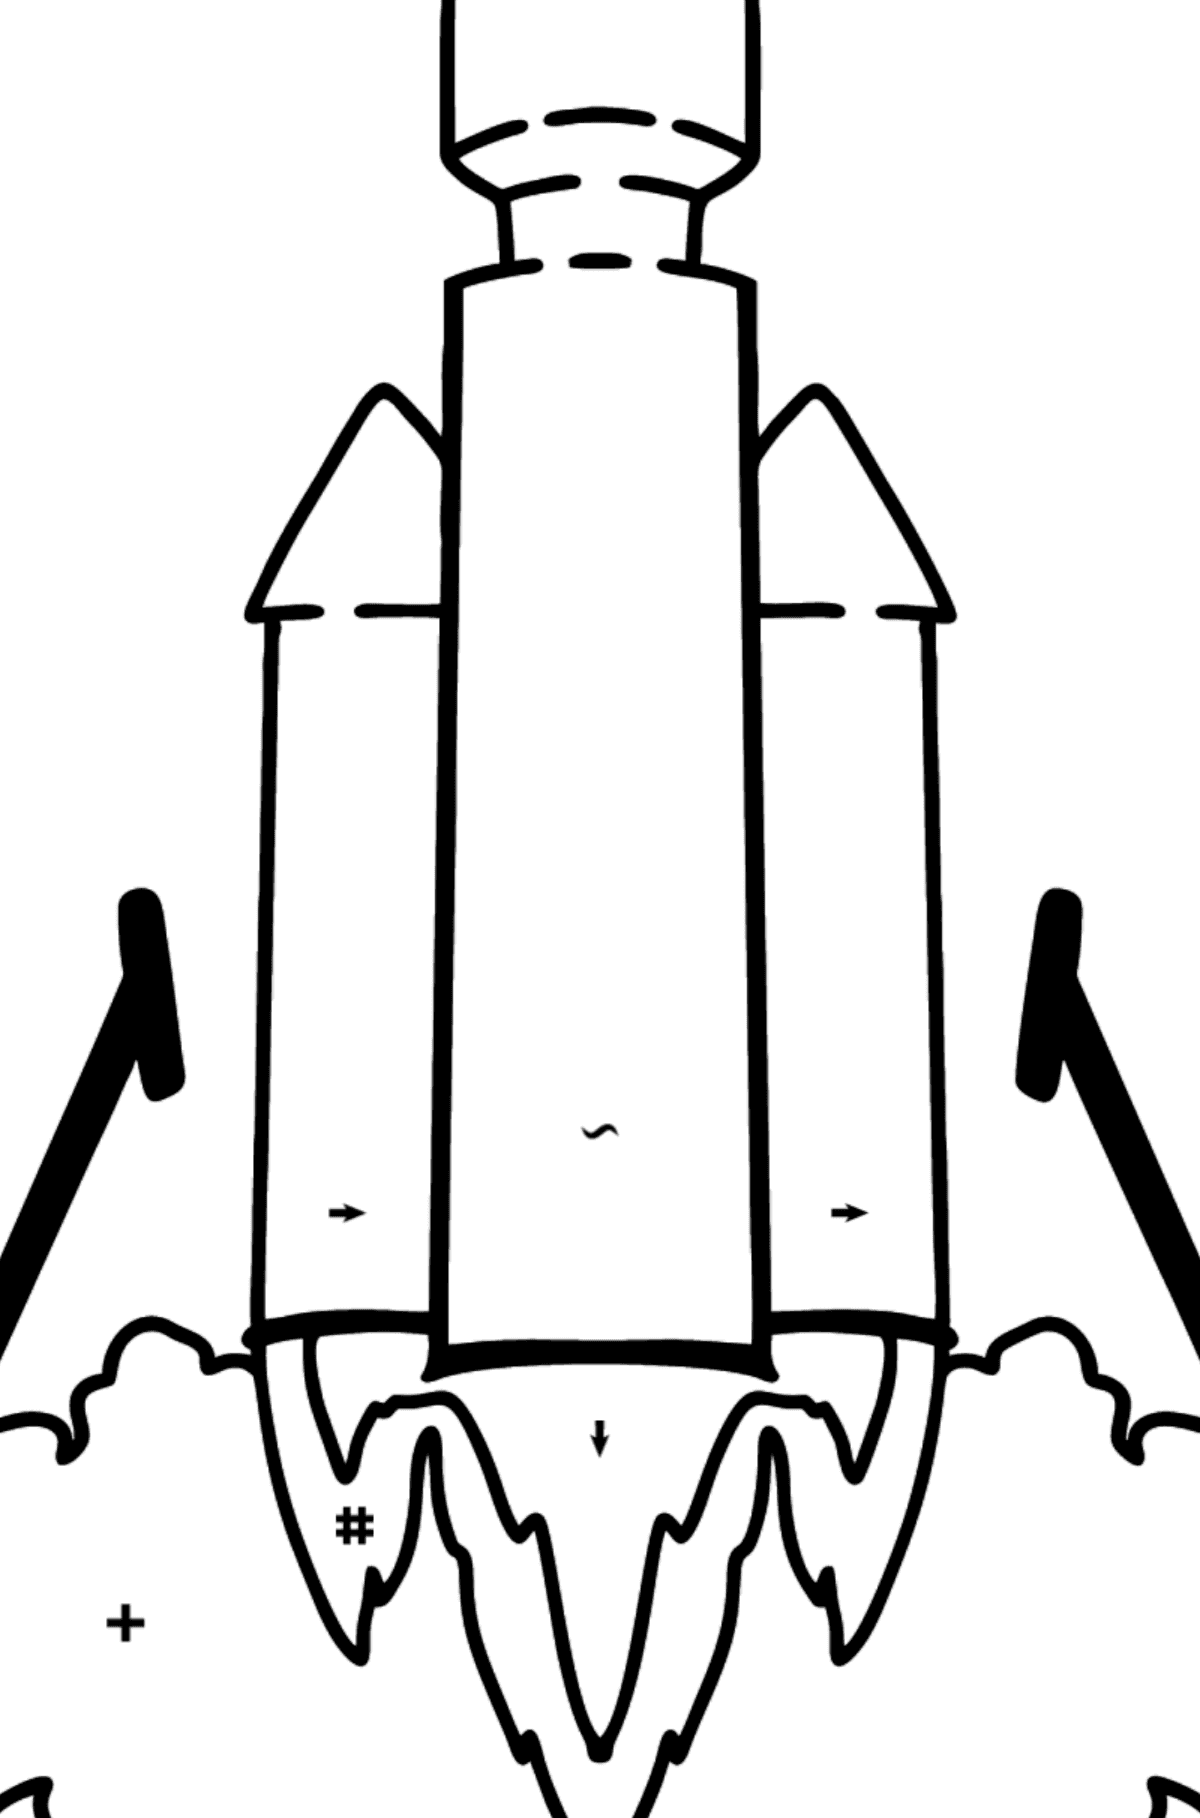 Rocket Launch coloring page - Coloring by Symbols for Kids